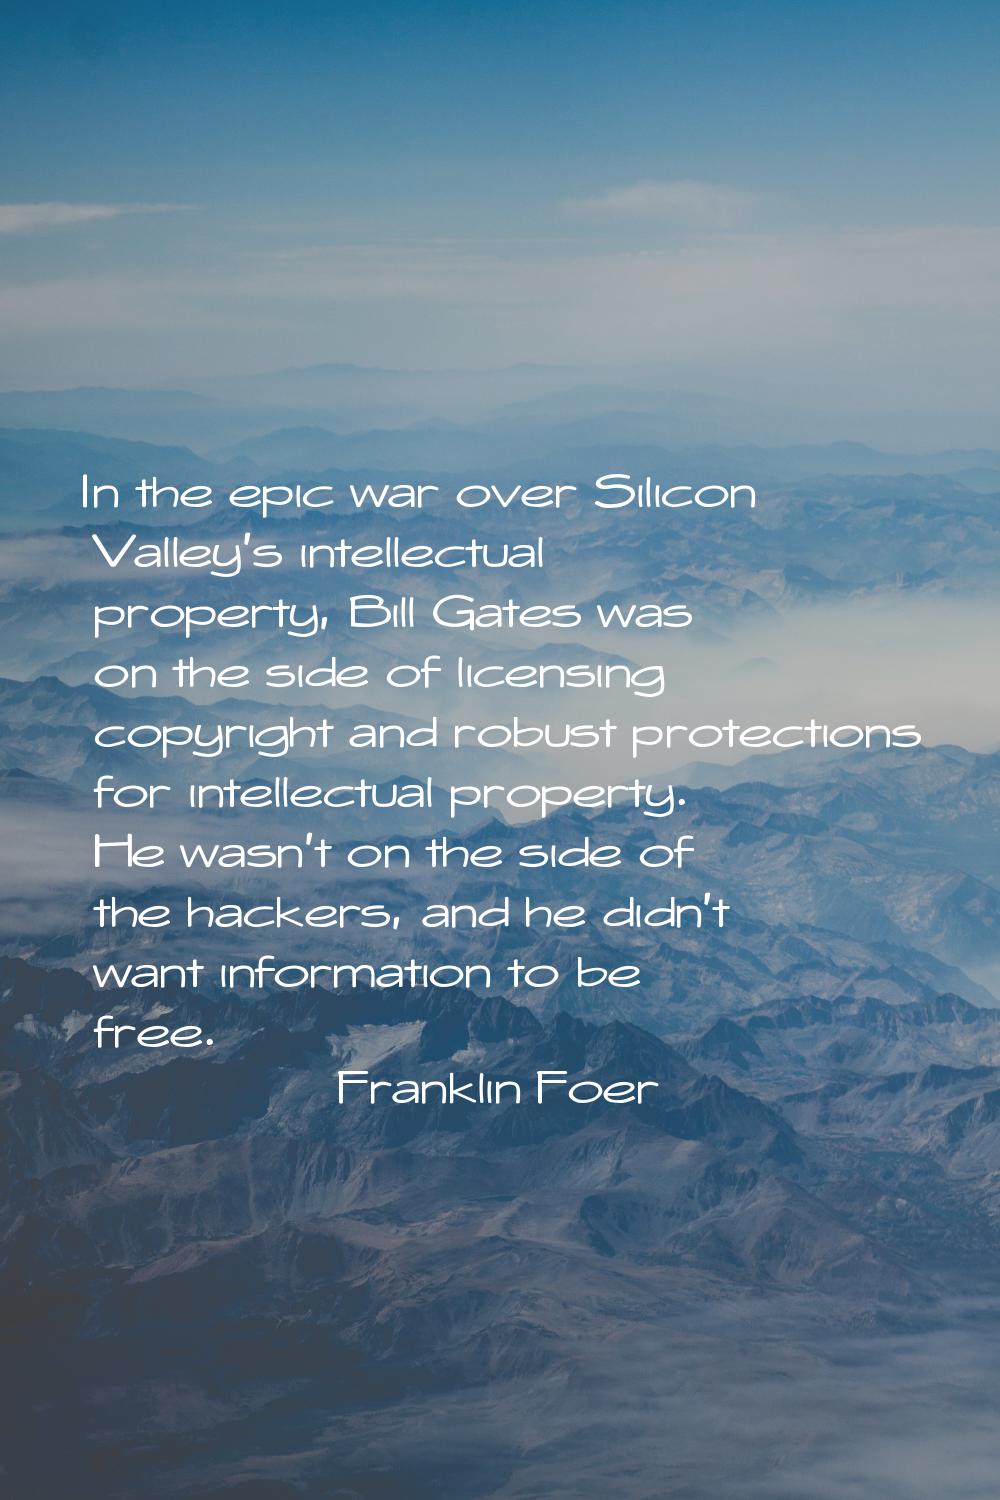 In the epic war over Silicon Valley's intellectual property, Bill Gates was on the side of licensin